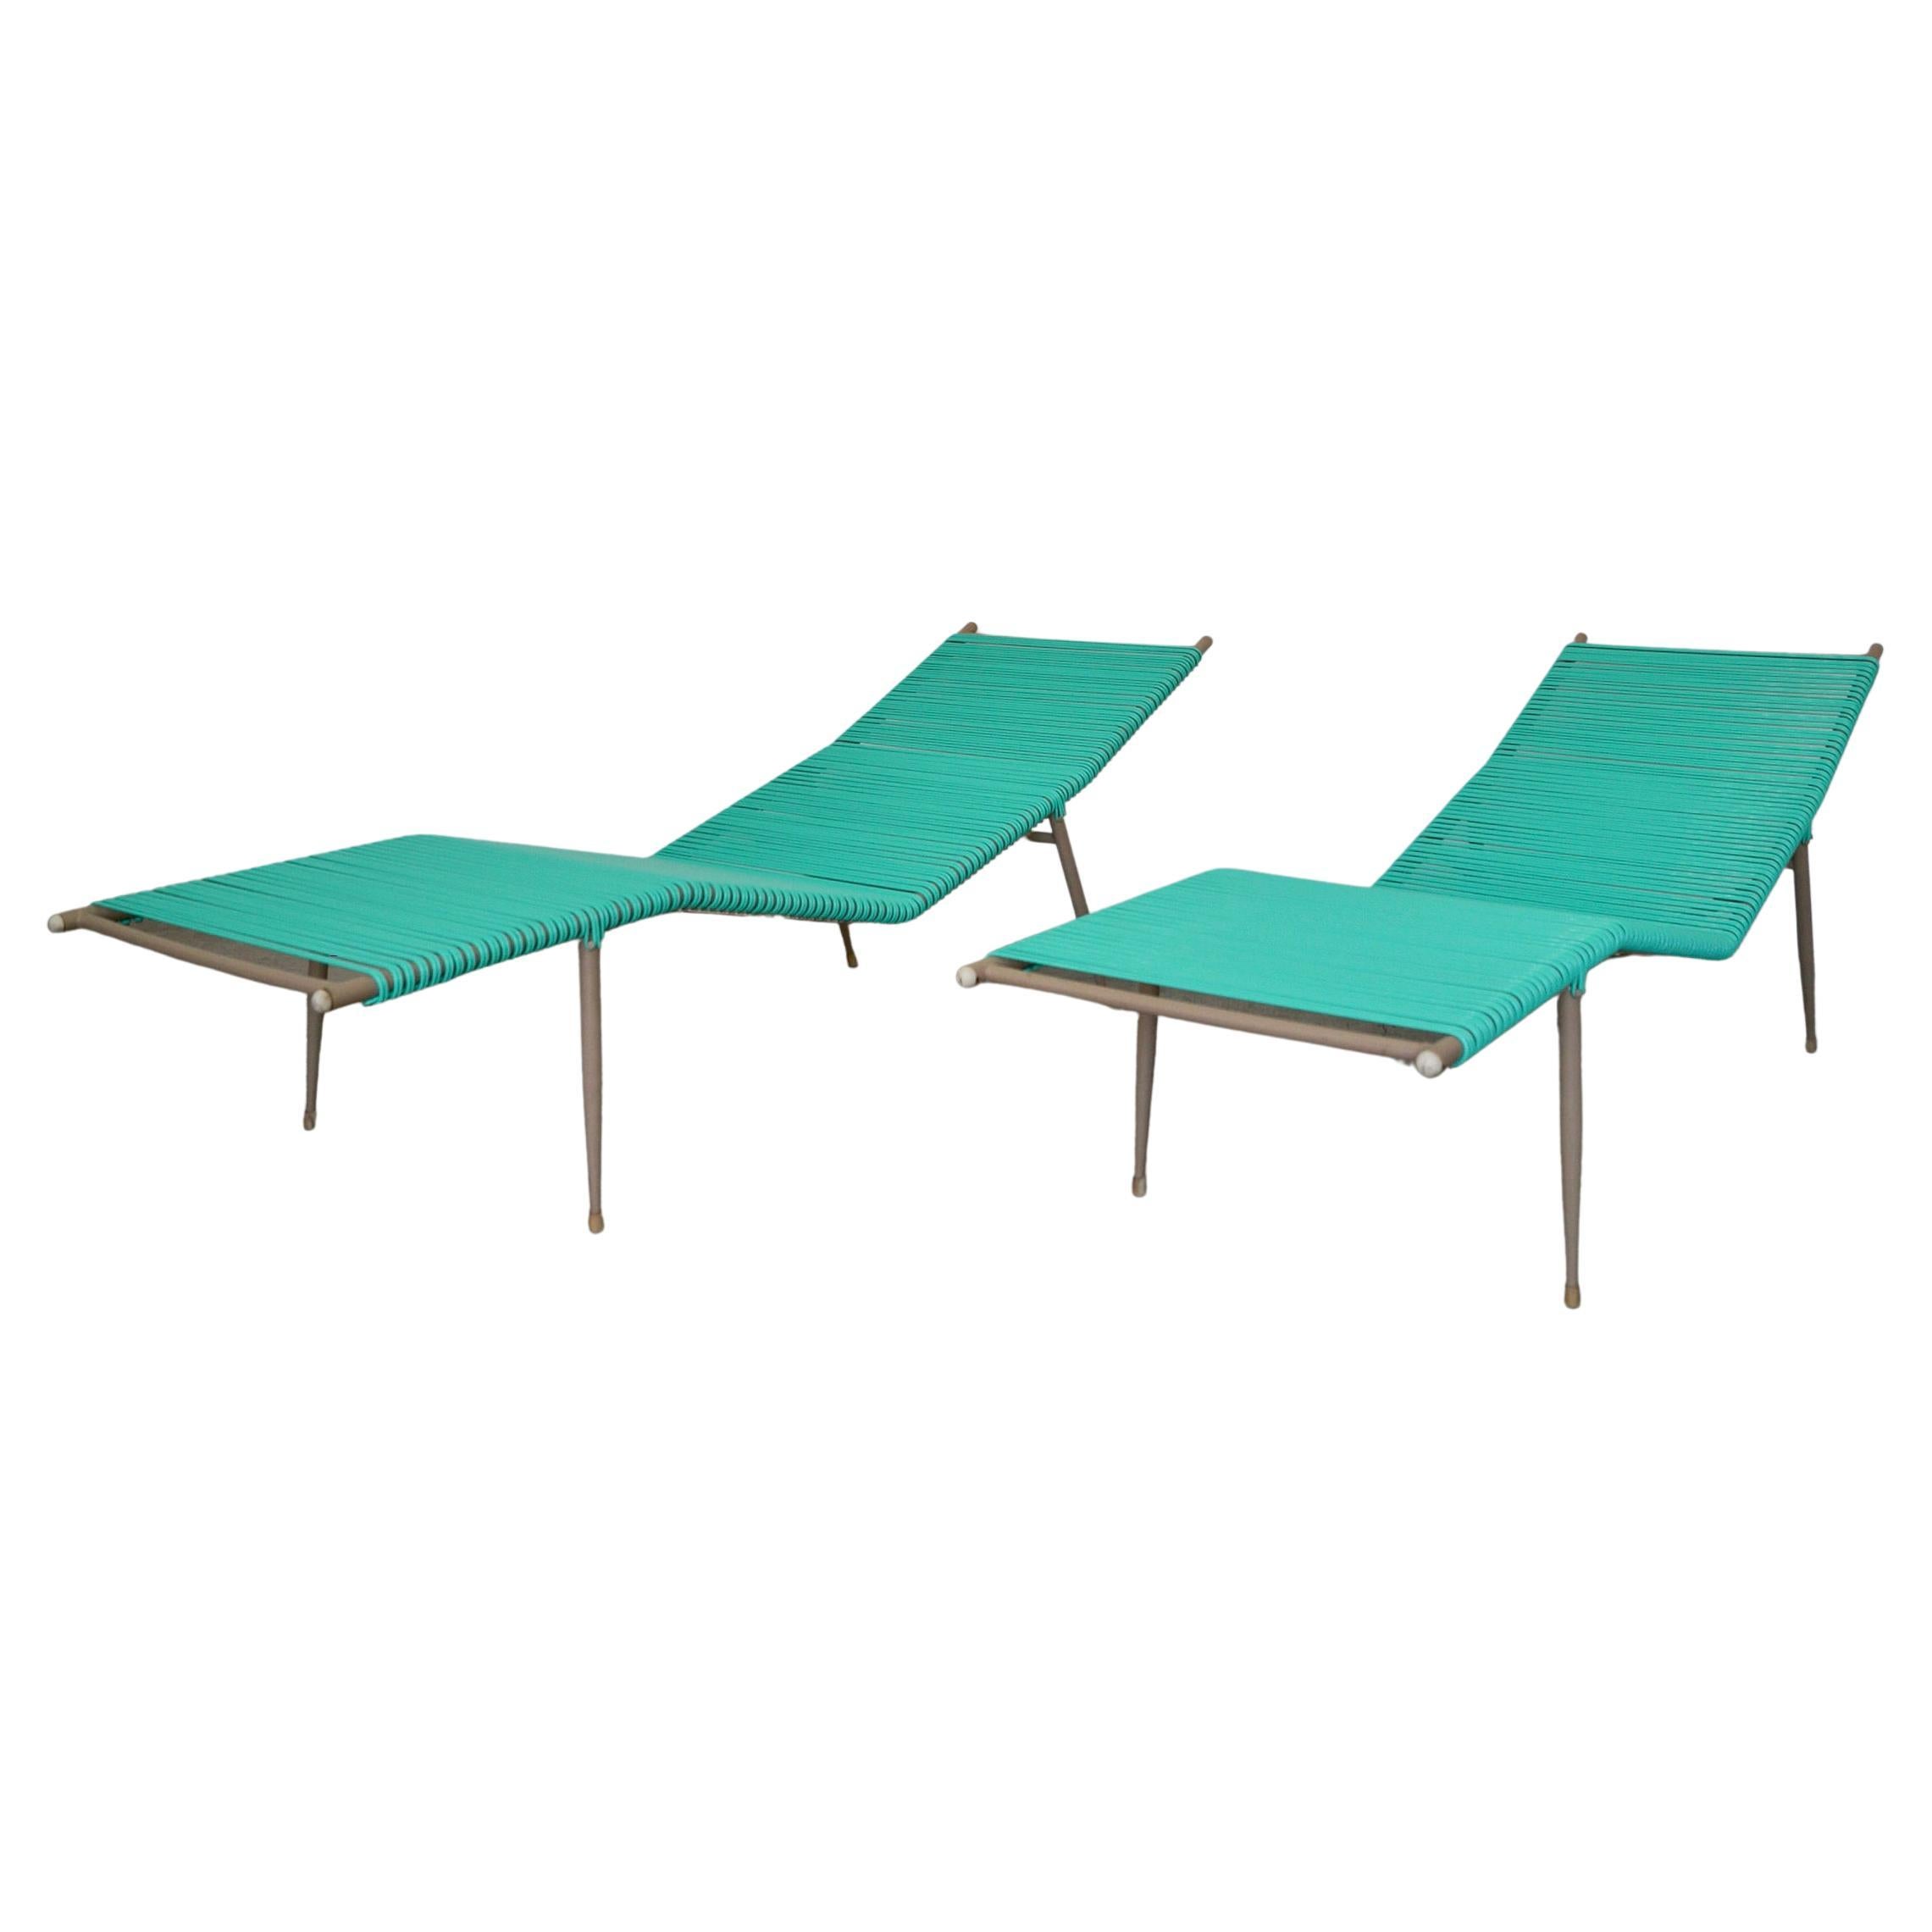 1950's Mid-Century Modern Patio POOL Chaise Lounge Chairs, a Pair